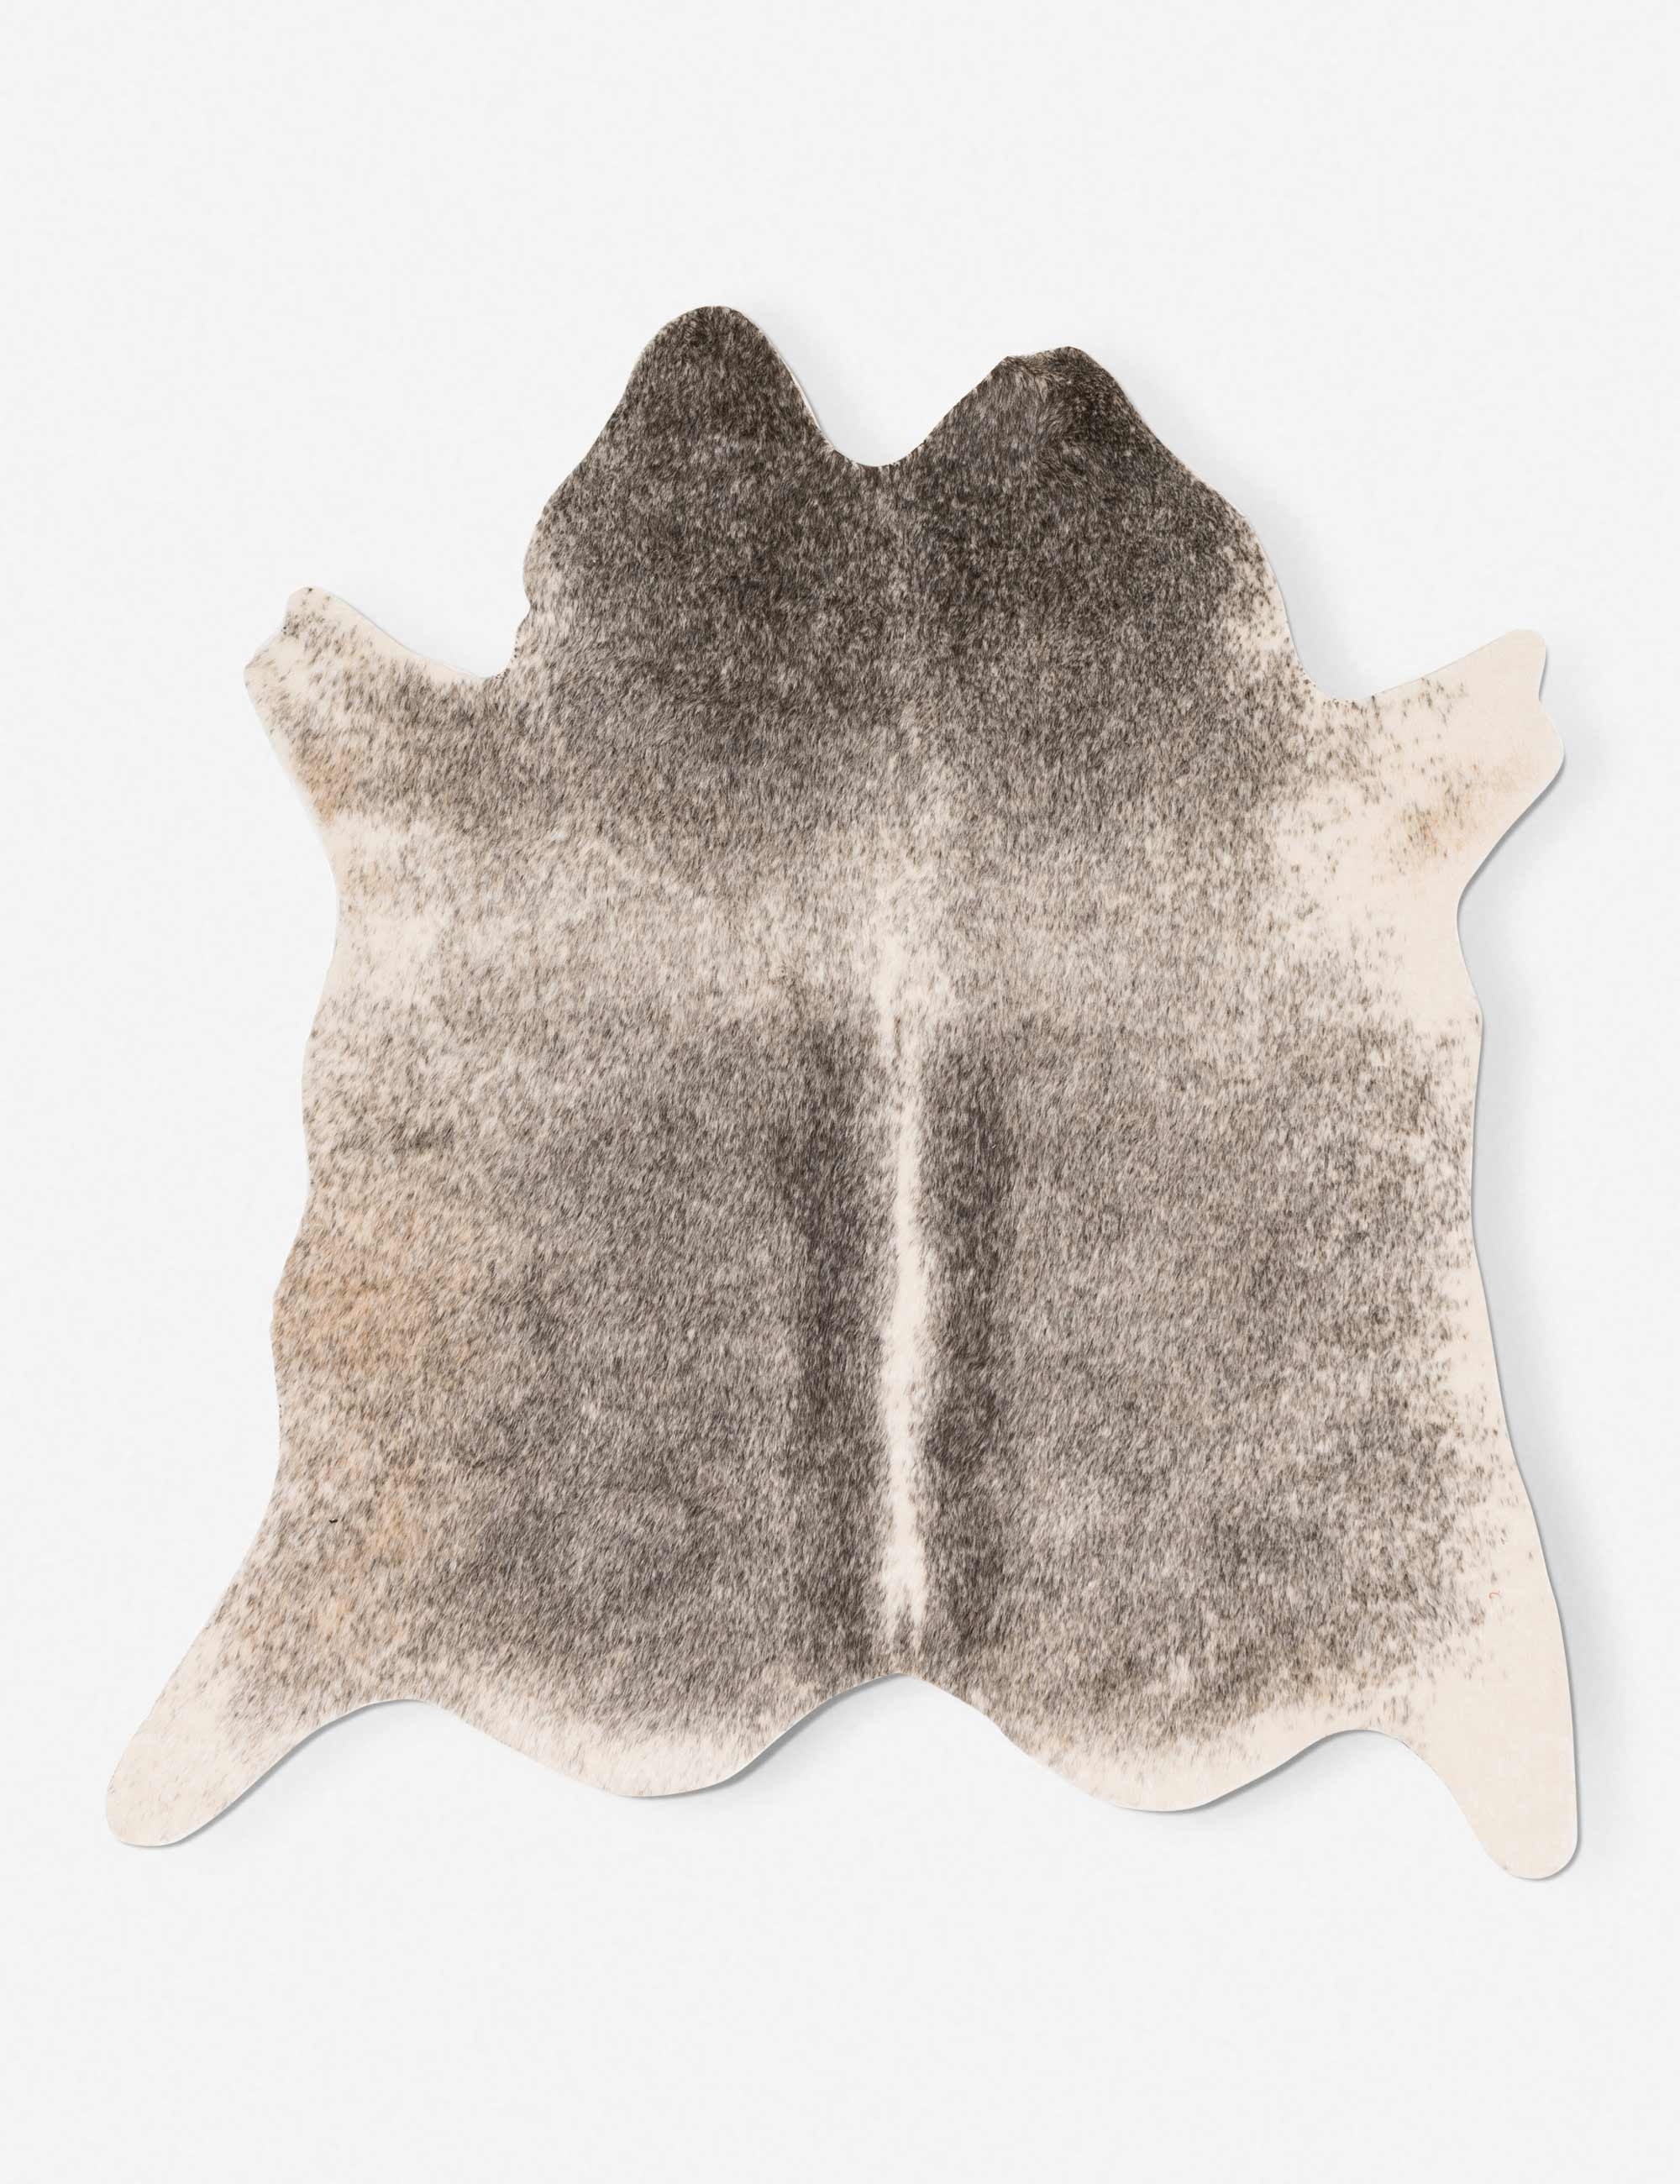 Winsley Faux Cowhide Rug, Ivory and Gray 5' x 6' 6" - Image 0